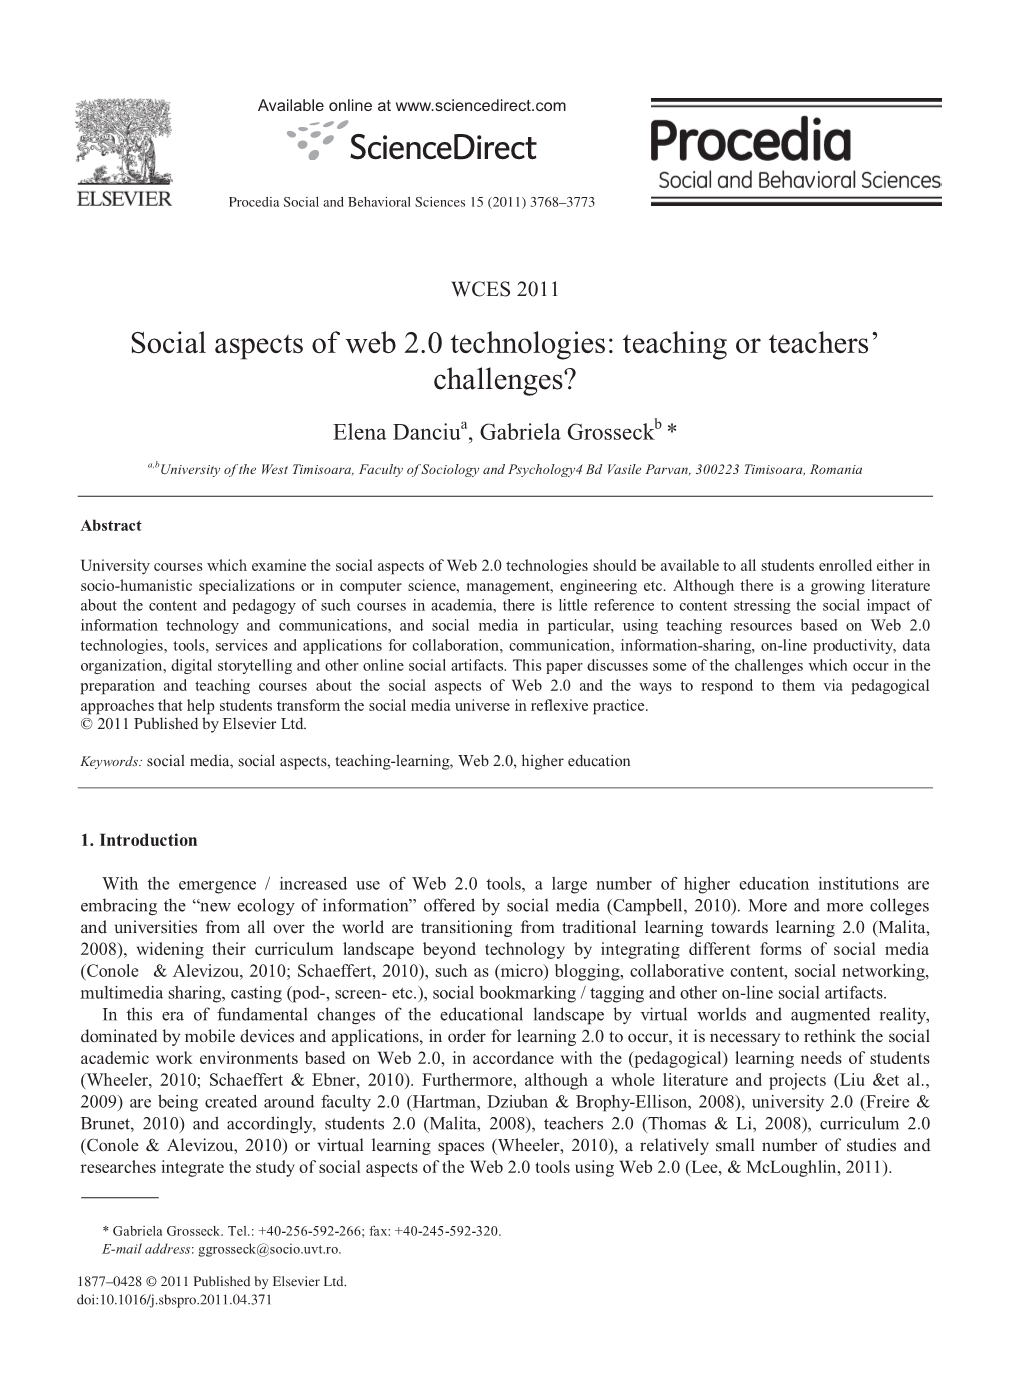 Social Aspects of Web 2.0 Technologies: Teaching Or Teachers' Challenges?